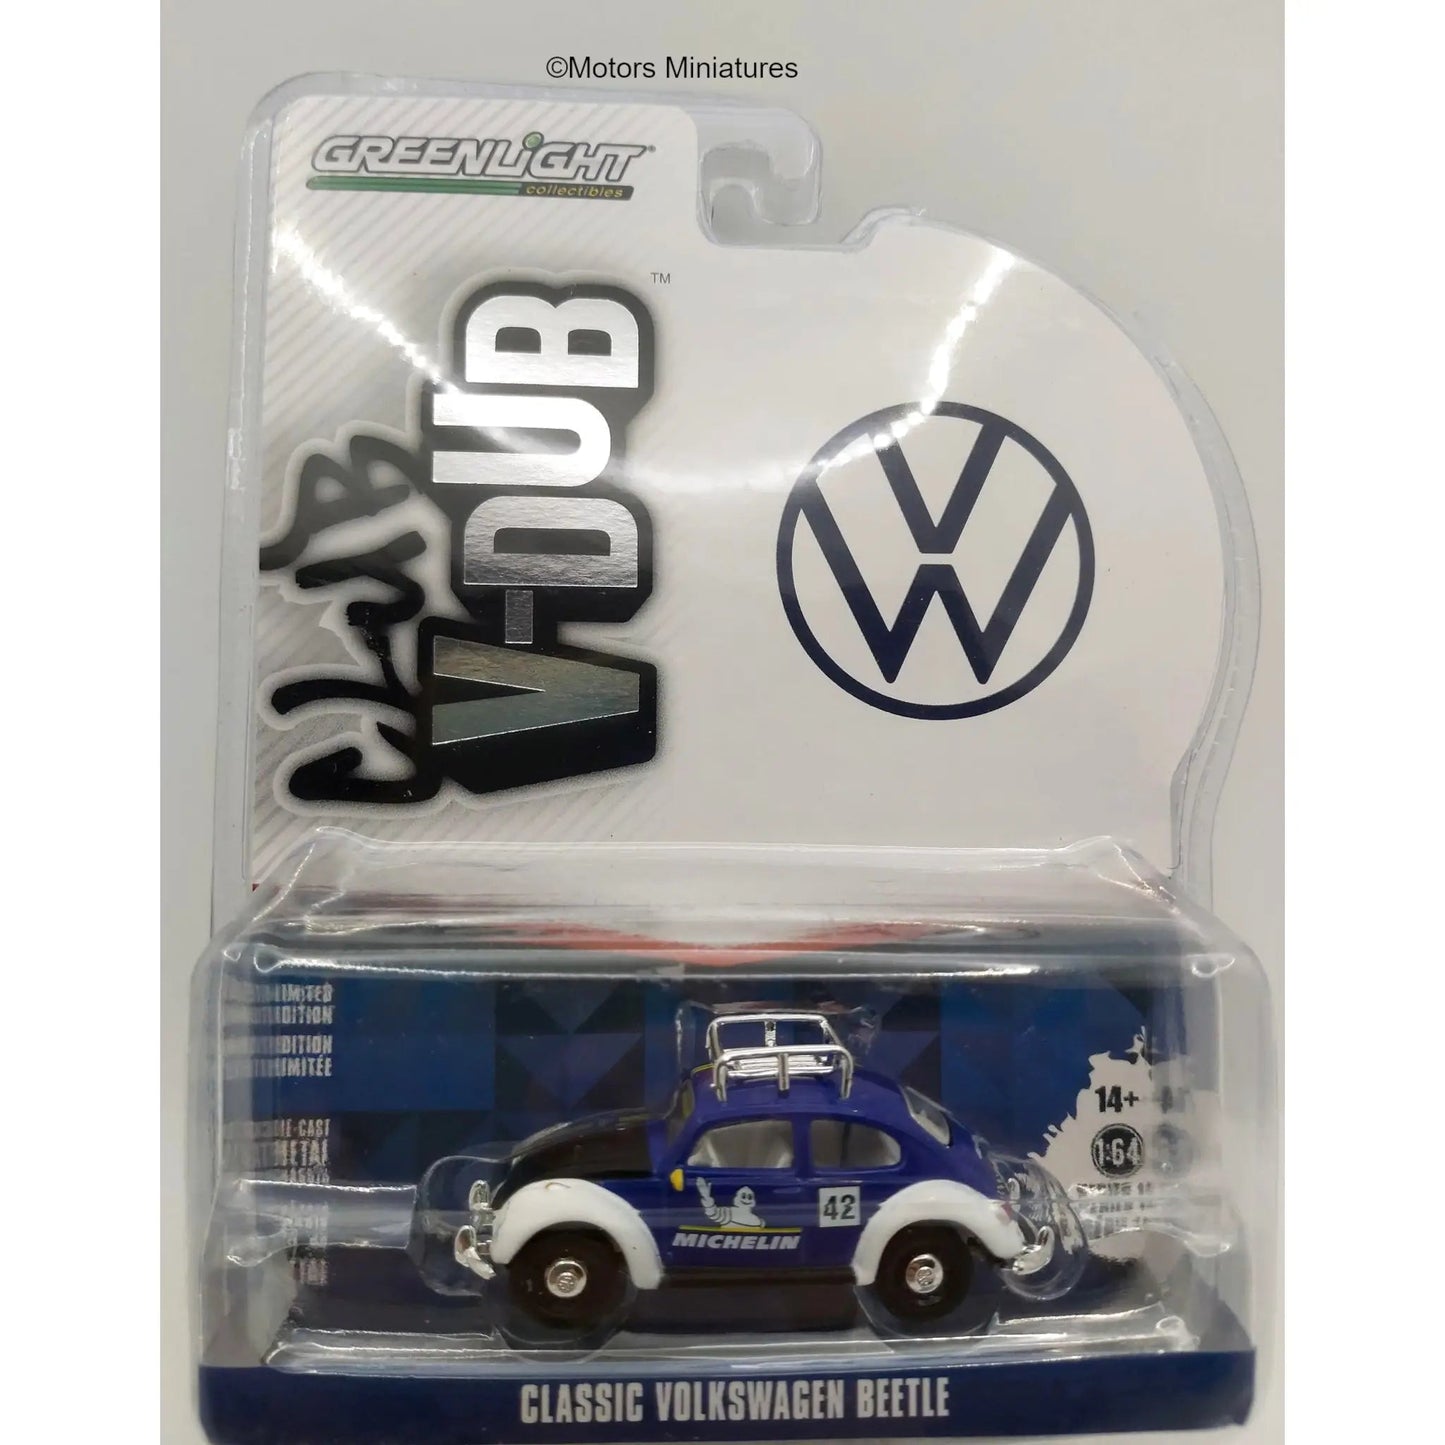 Volkswagen Beetle with roof rack michelin tires Club Vee-Dub Series 14 Greenlight 1/64 - gl36050E